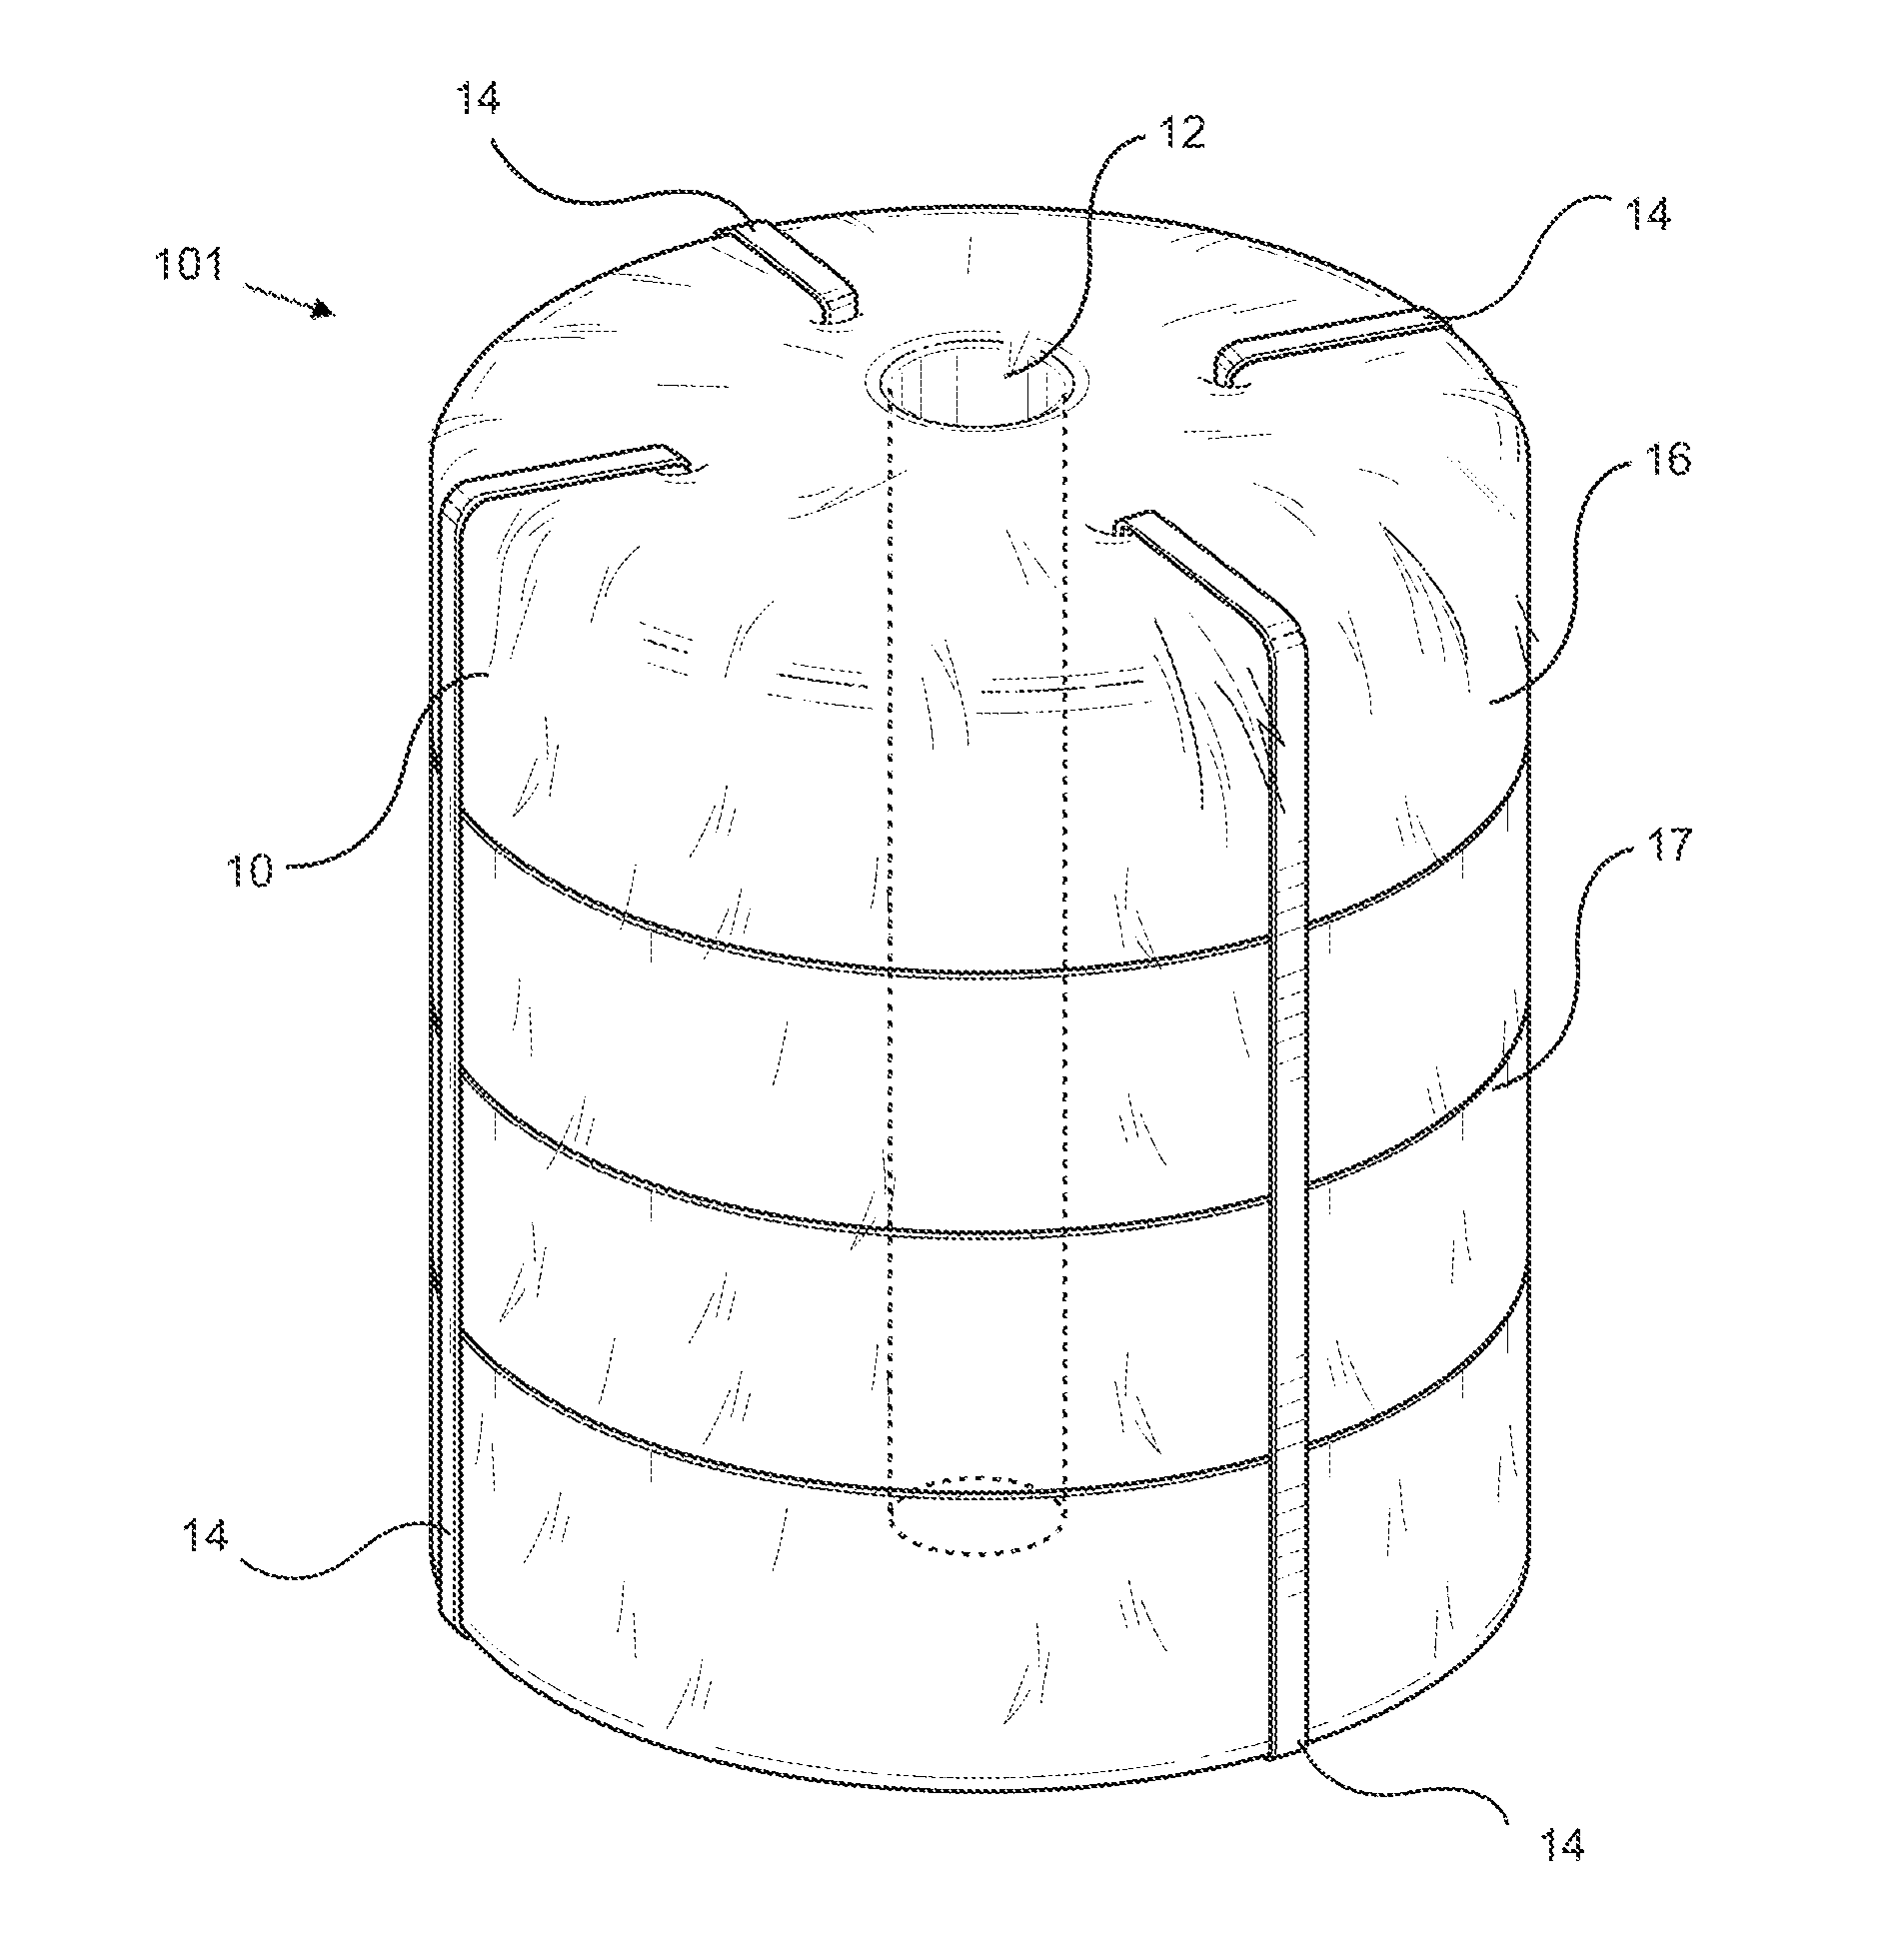 Plant growing apparatus, systems and methods